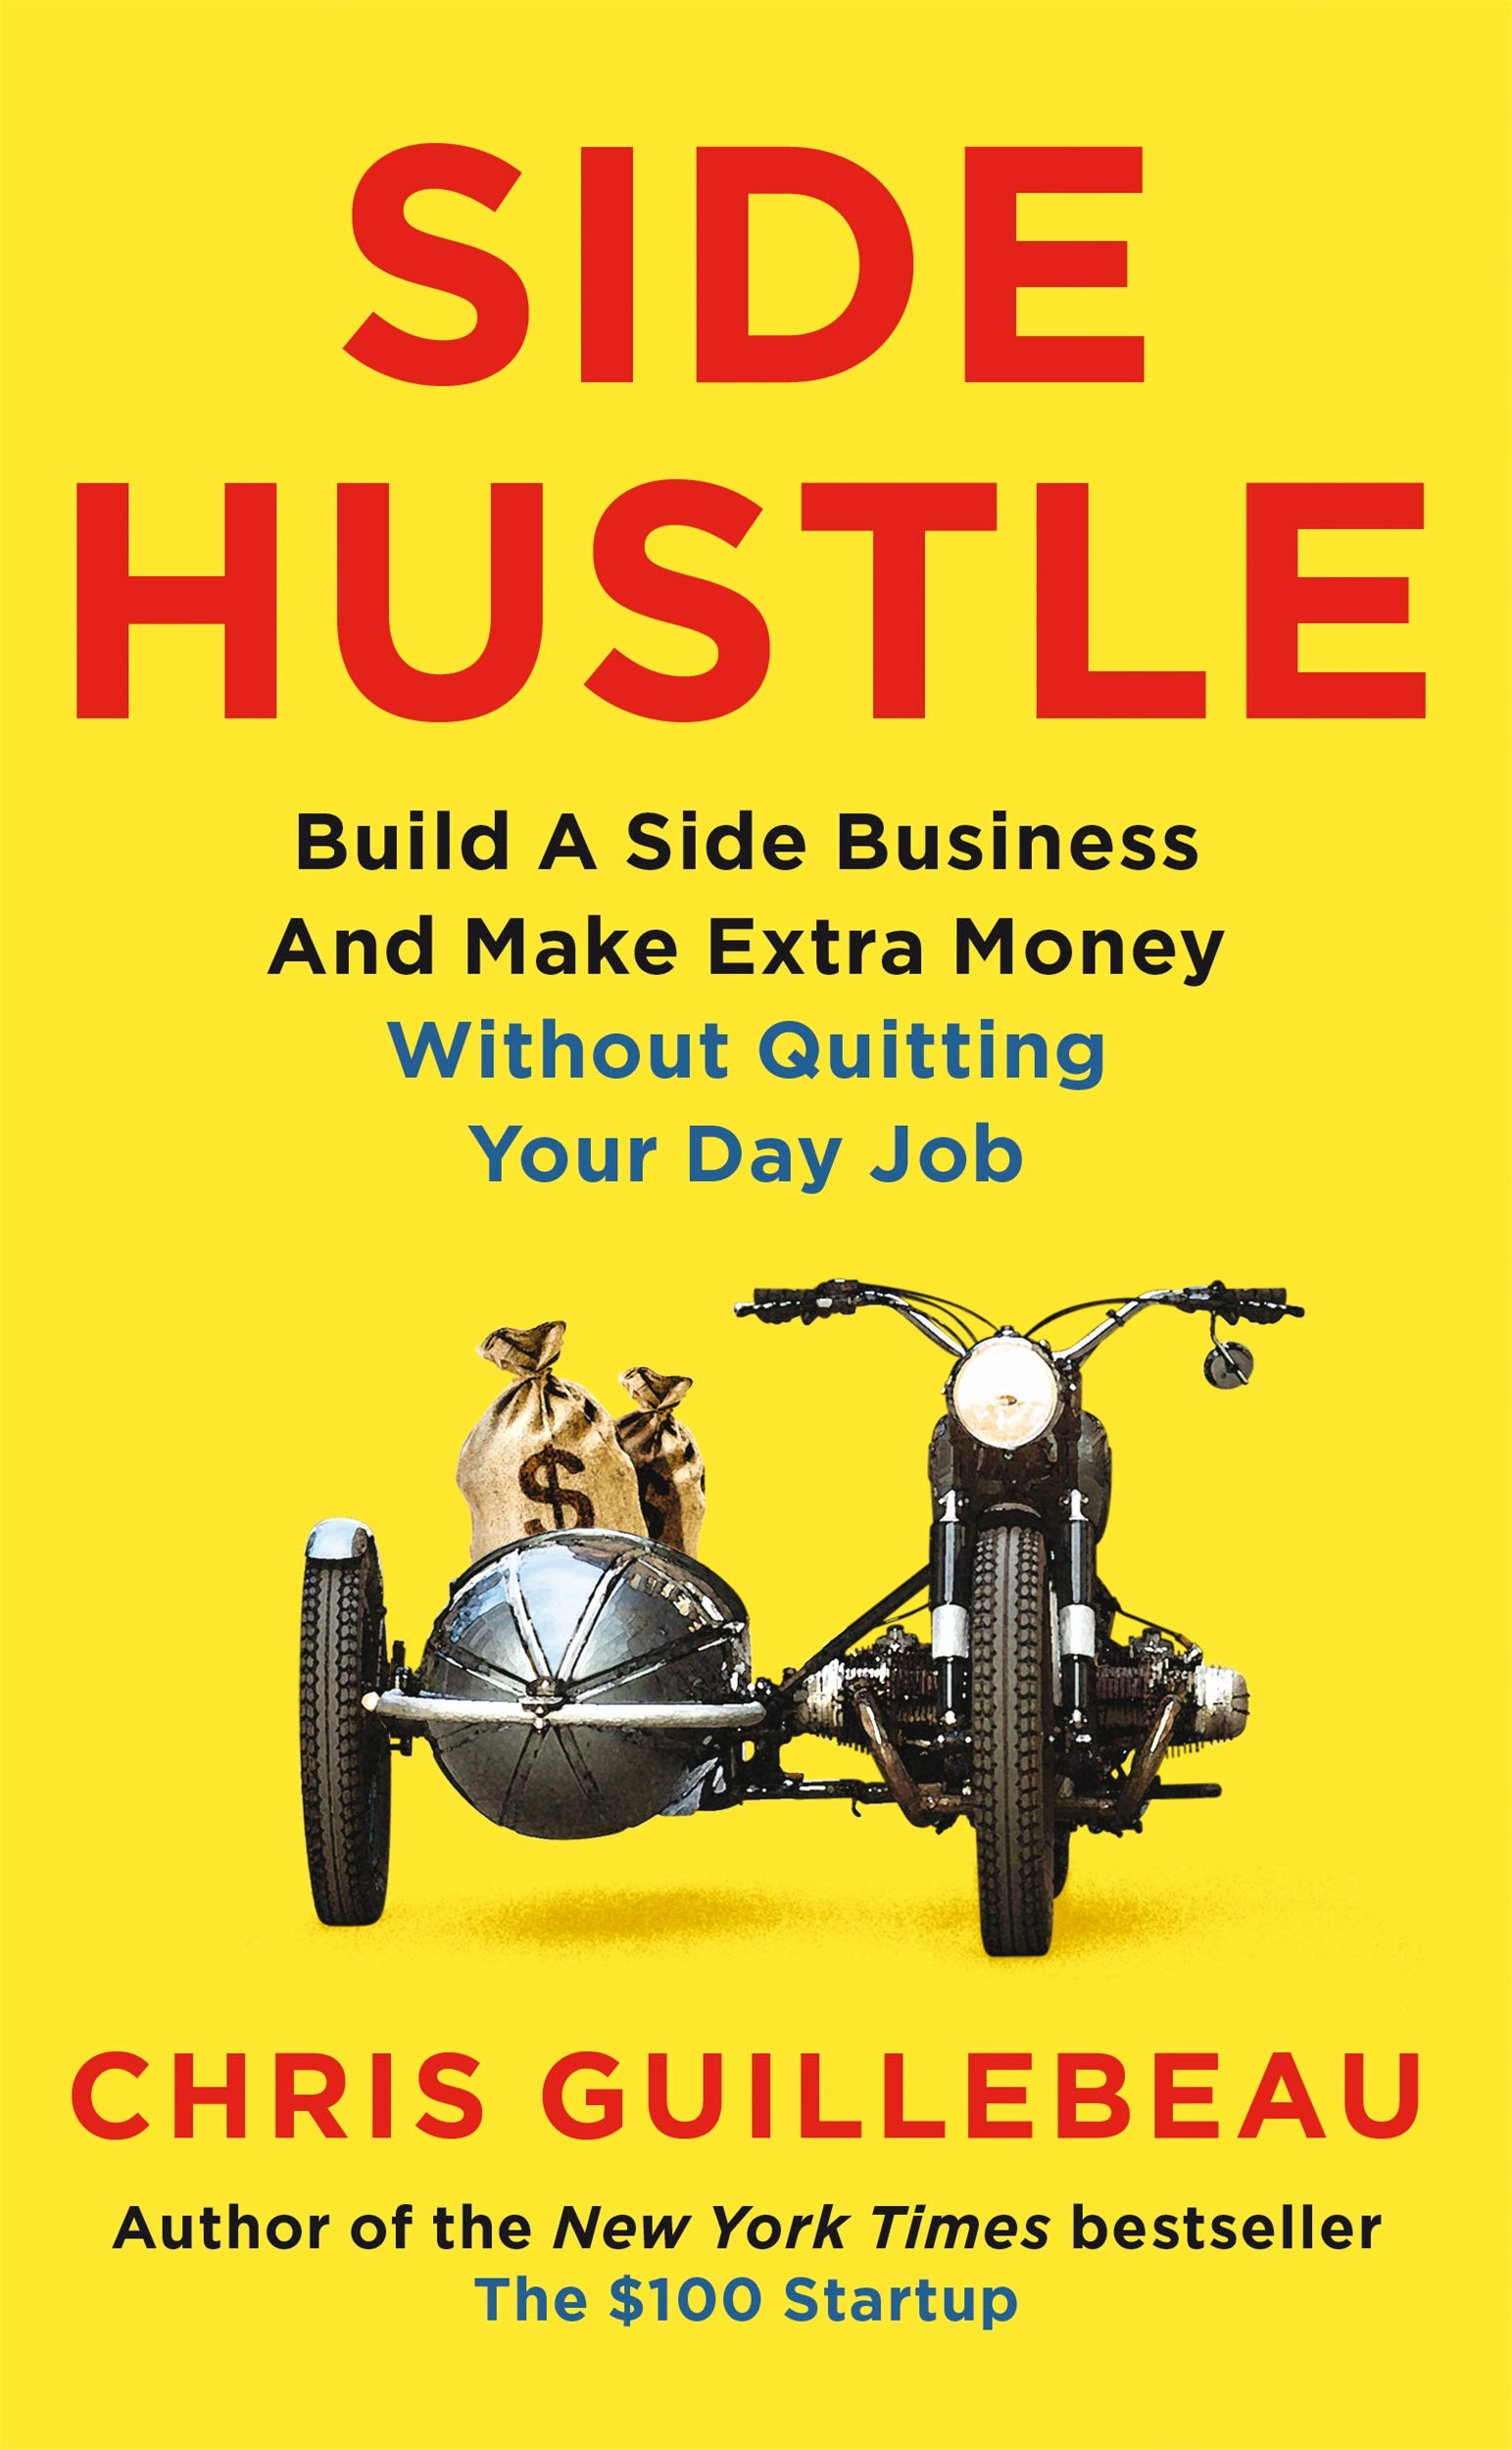 Side Hustle: Build a Side Business and Make Extra Money | Chris Guillebeau